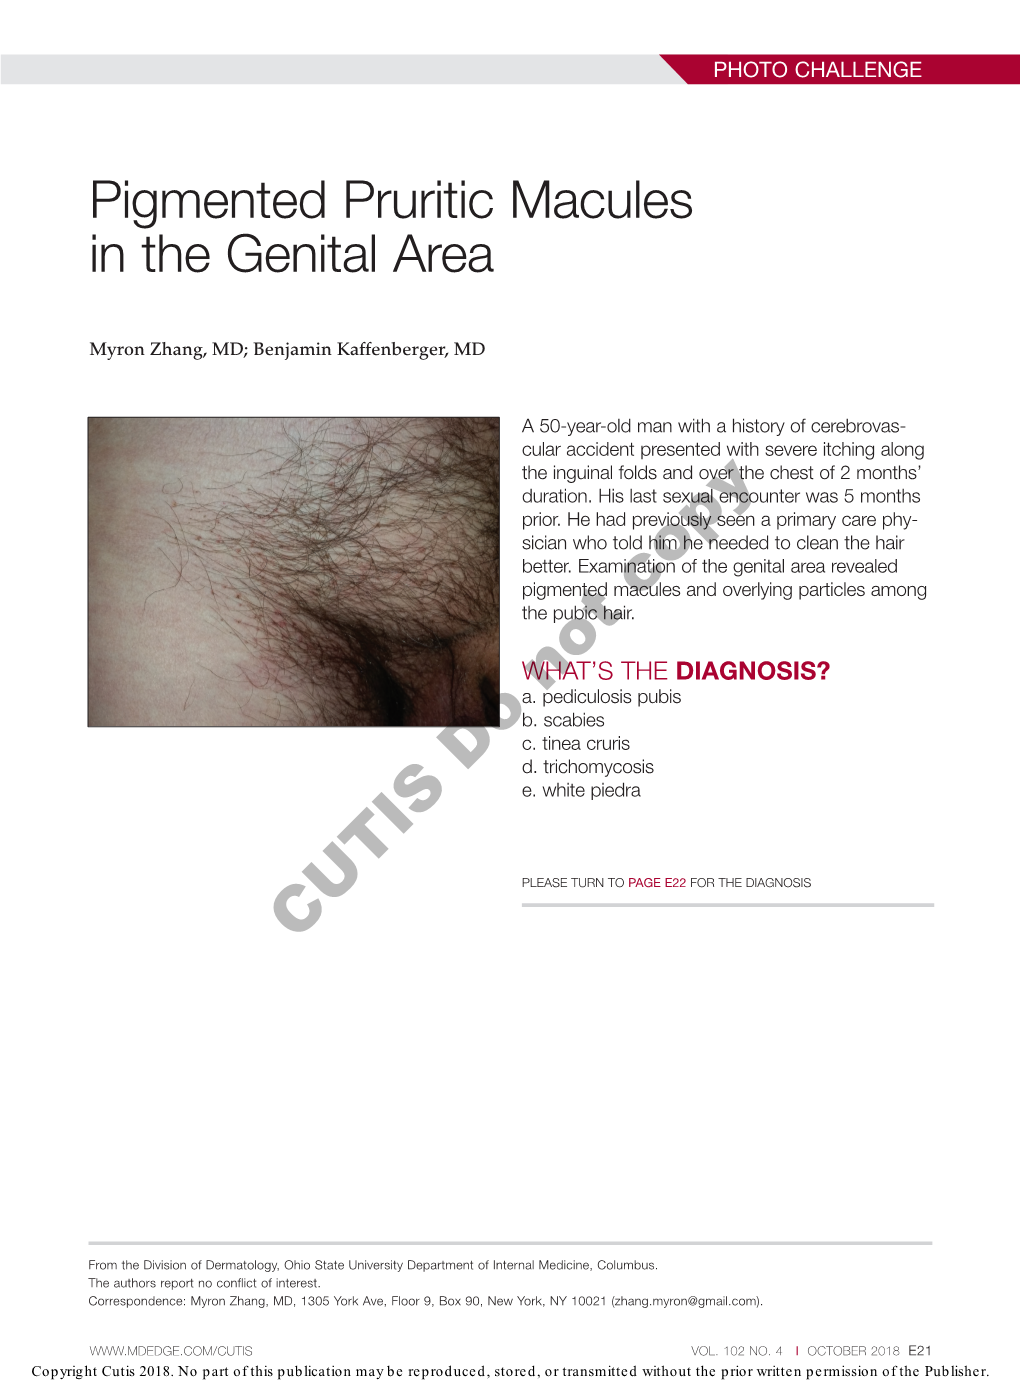 Pigmented Pruritic Macules in the Genital Area